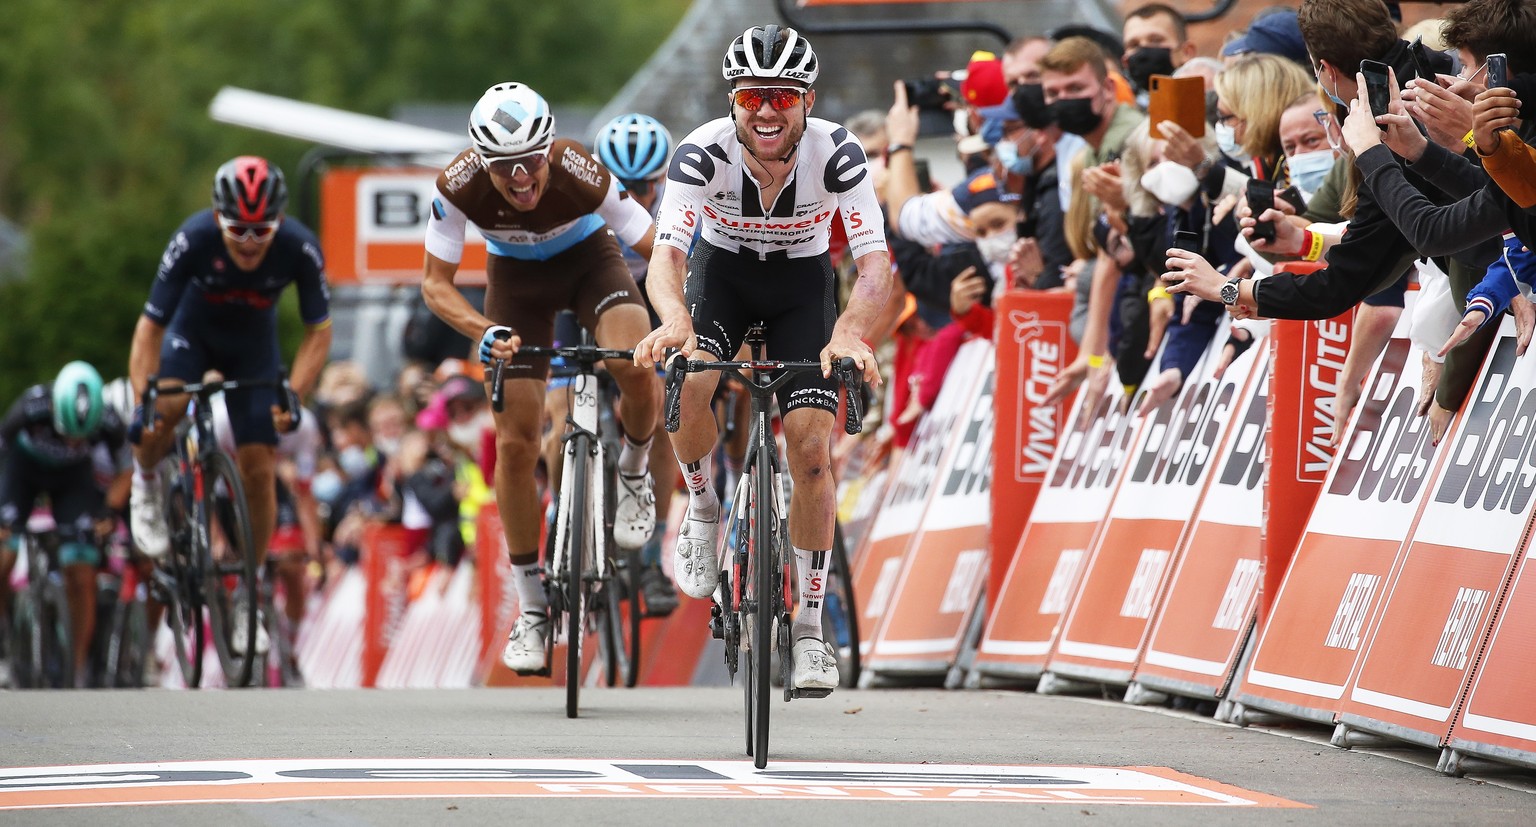 epa08708896 Swiss rider Marc Hirschi (C) of Team Sunweb crosses the finish line to win the 84th edition of the Fleche Wallonne one day cycling race over 202km from Herve to Huy, Belgium, 30 September  ...